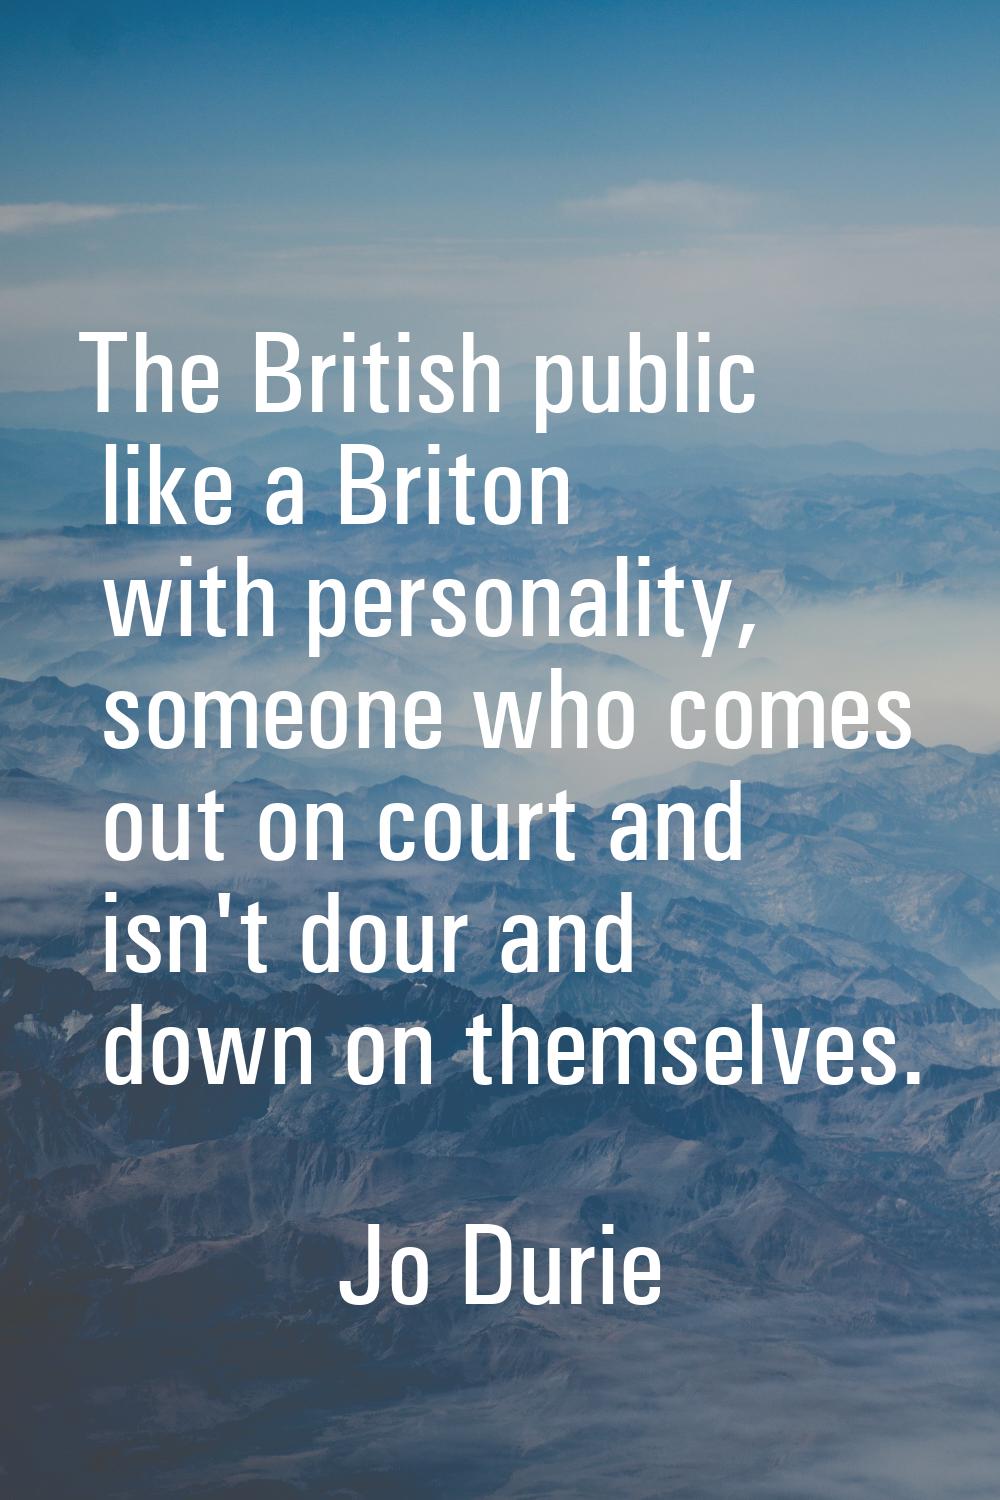 The British public like a Briton with personality, someone who comes out on court and isn't dour an